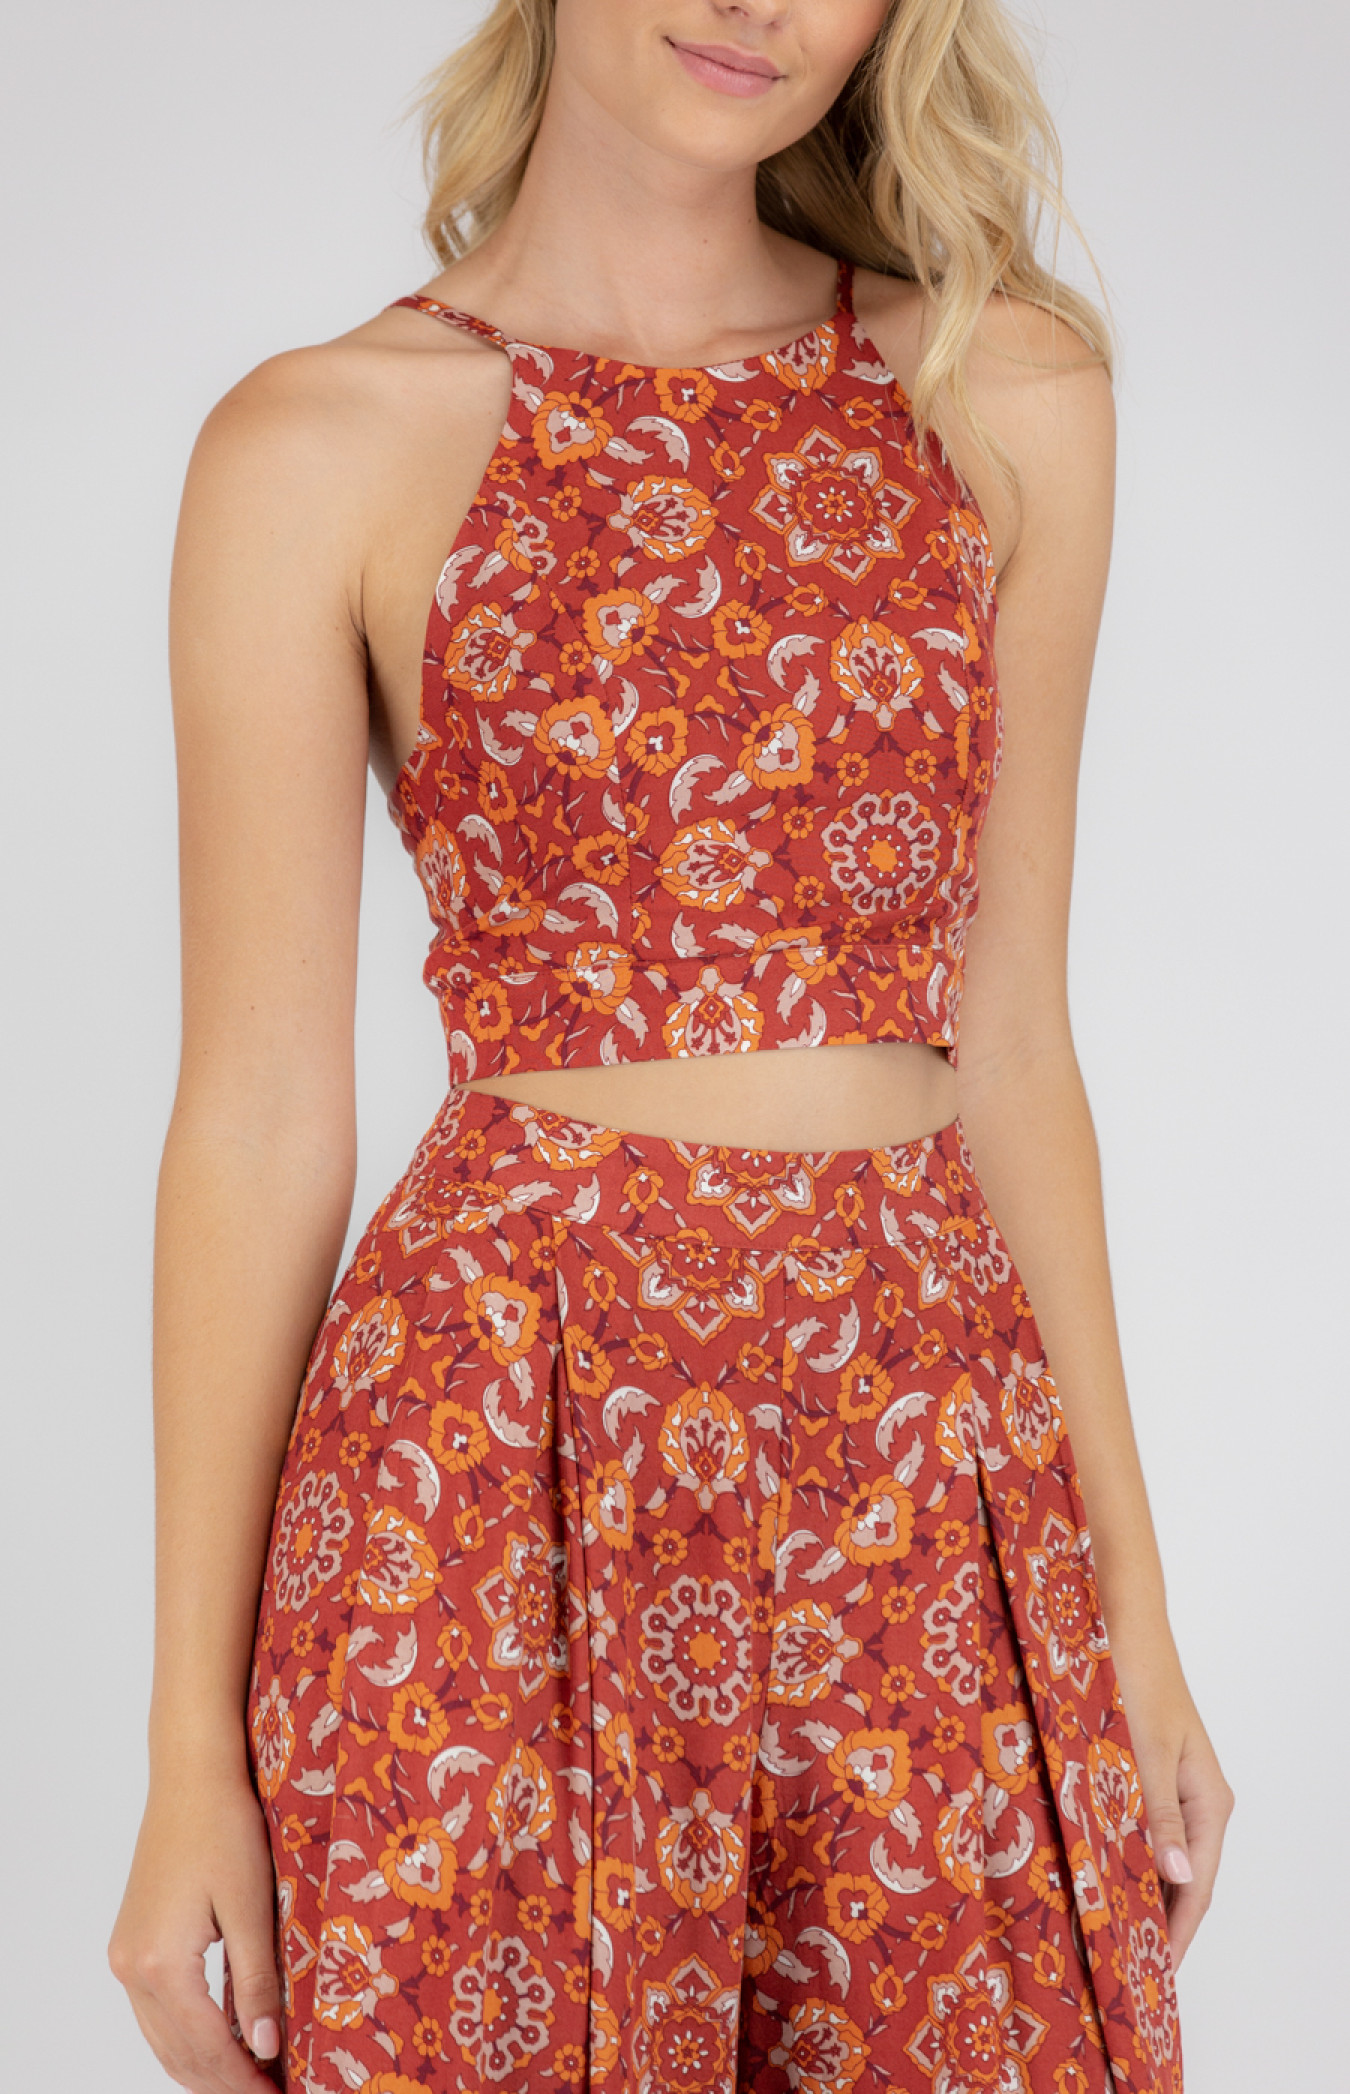 Orange and pink floral printed crop top with skirt - set of two by